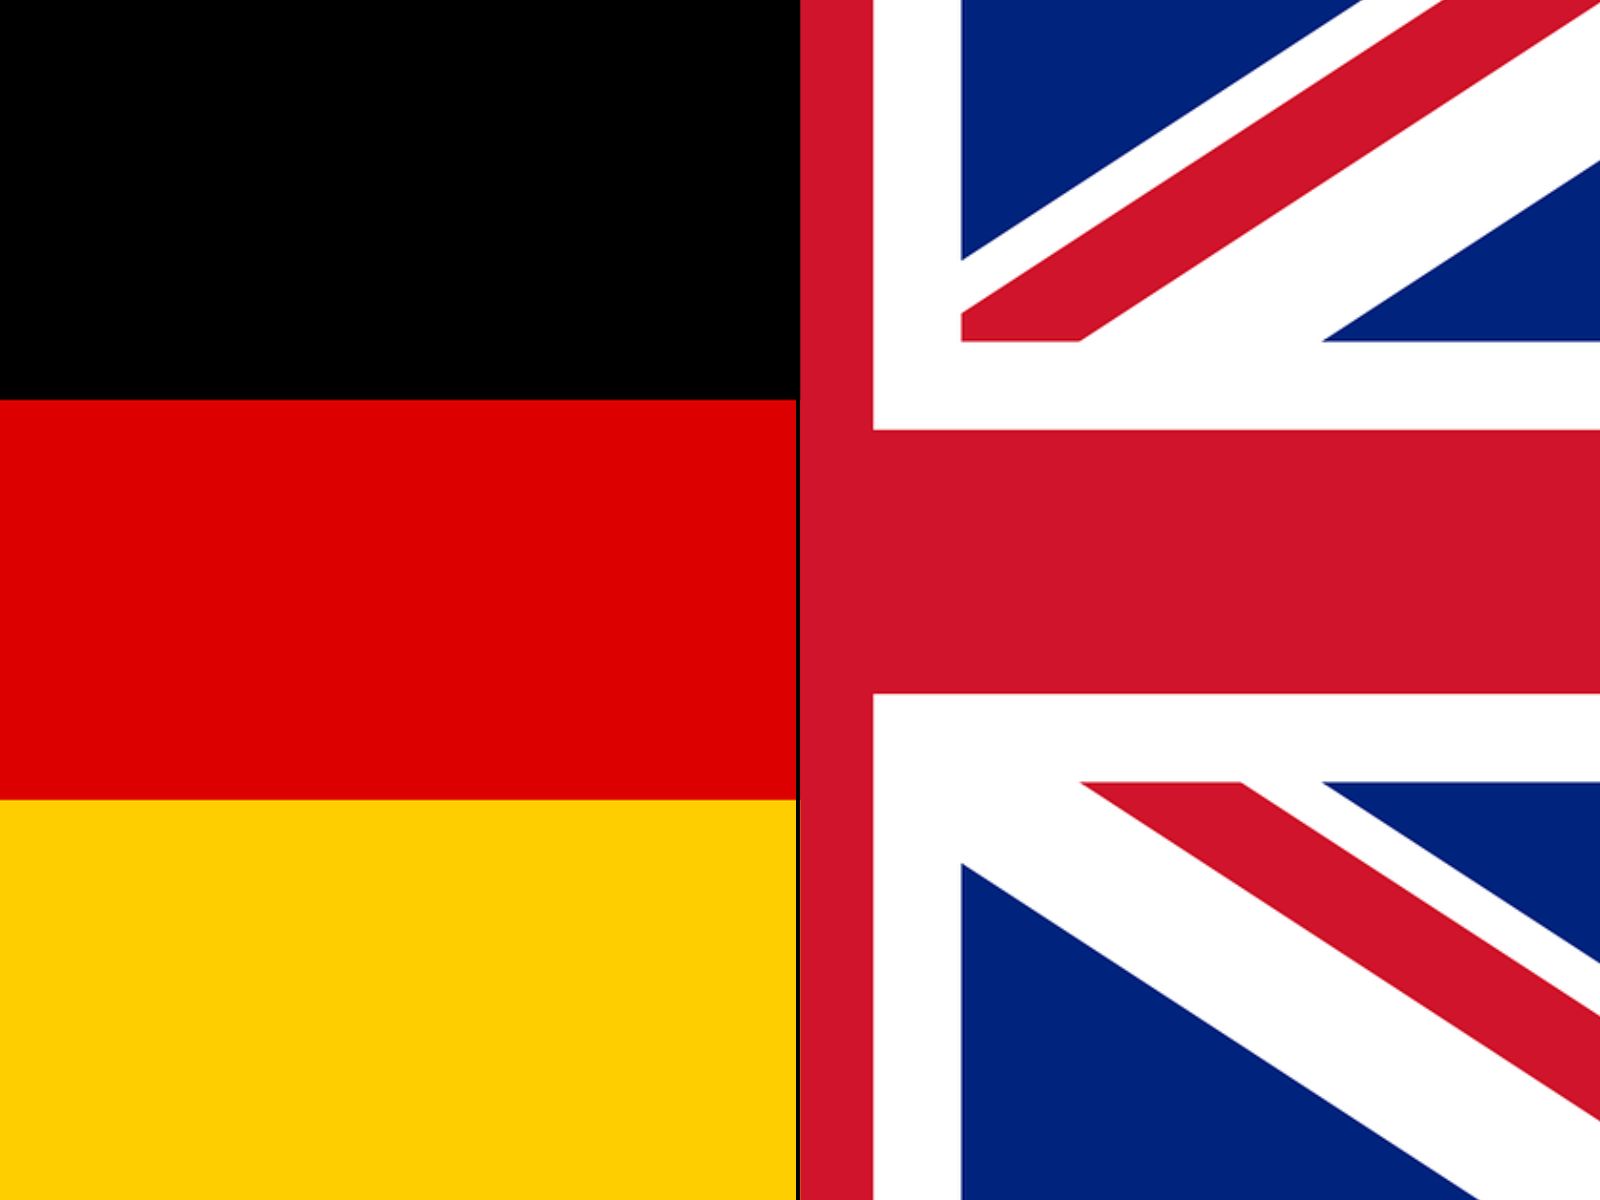 Germany And UK Projected To Have 77% Of Europe’s Medical Cannabis Market By 2028